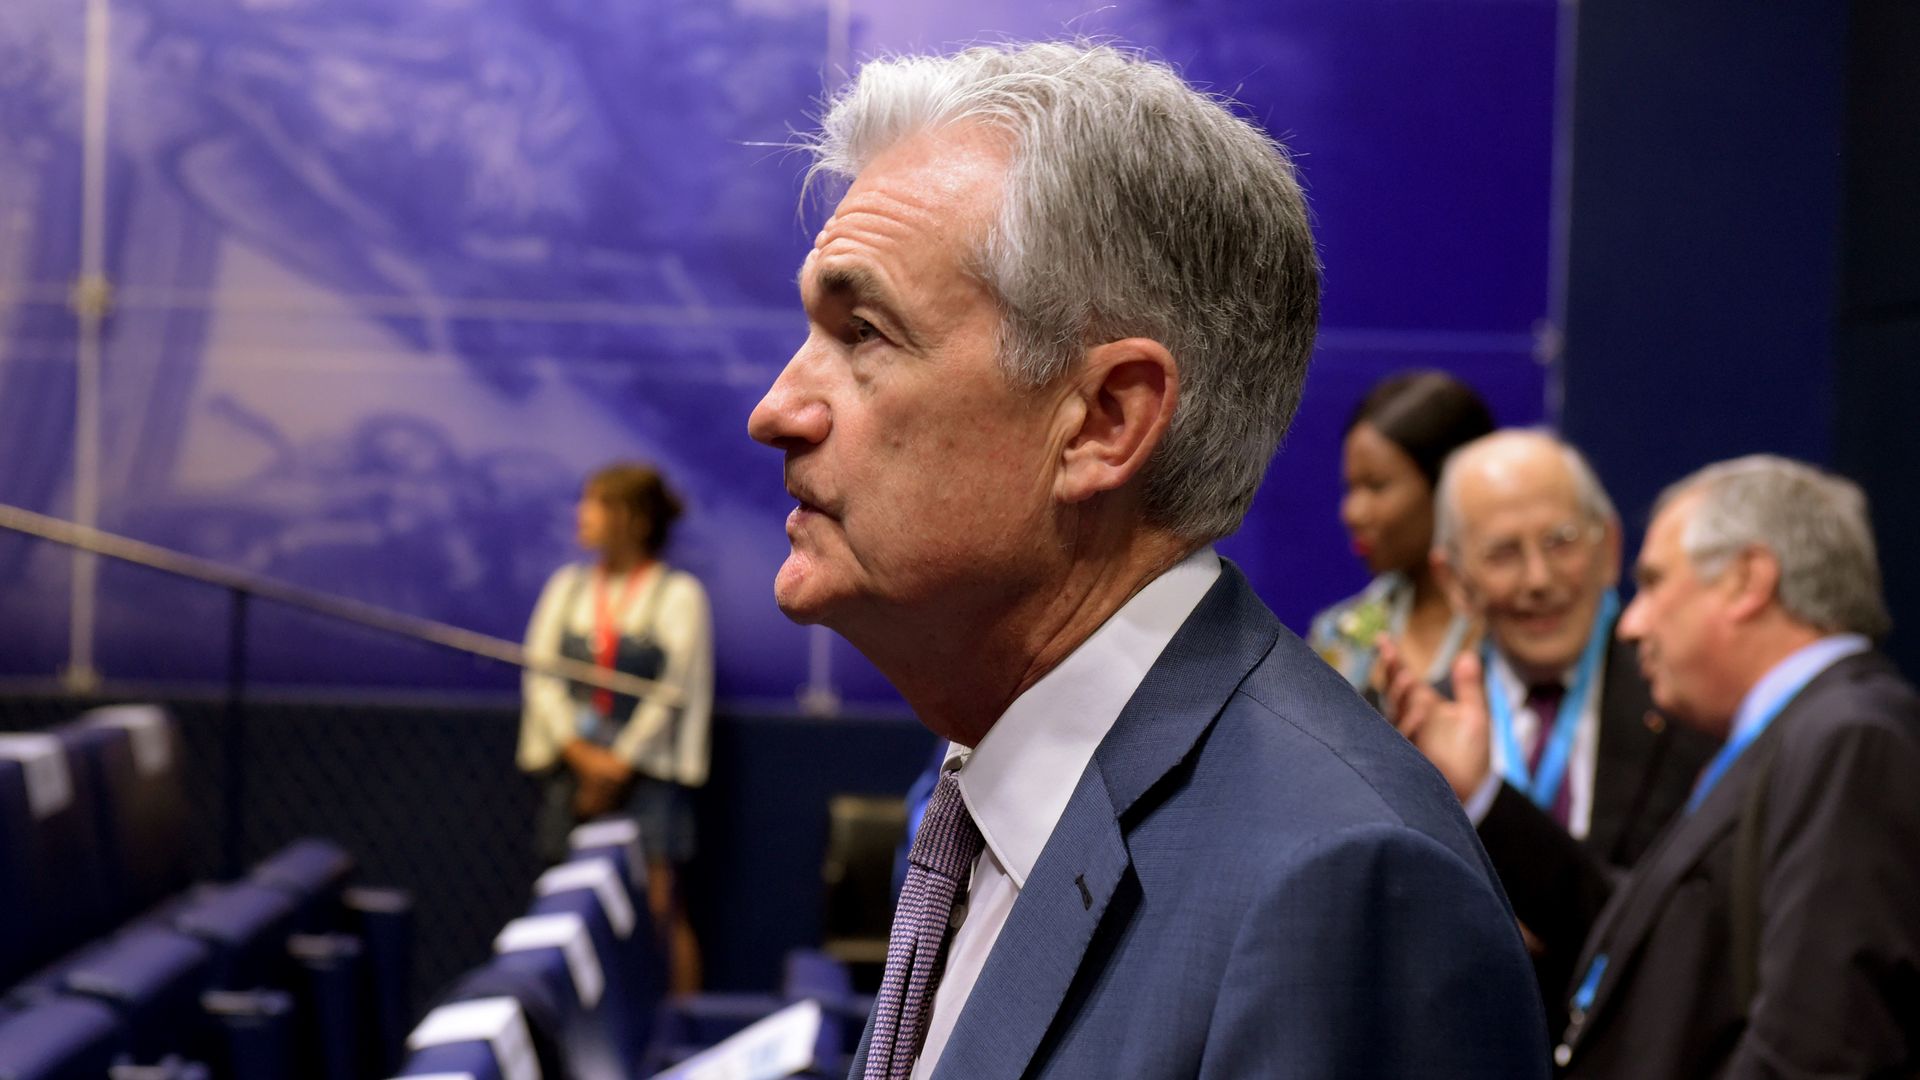 US Federal Reserve Board Chairman Jerome Powell attends a conference on the theme "Bretton Woods: 75 years later - Thinking about the next 75 years" at the Banque de France headquarters in Paris